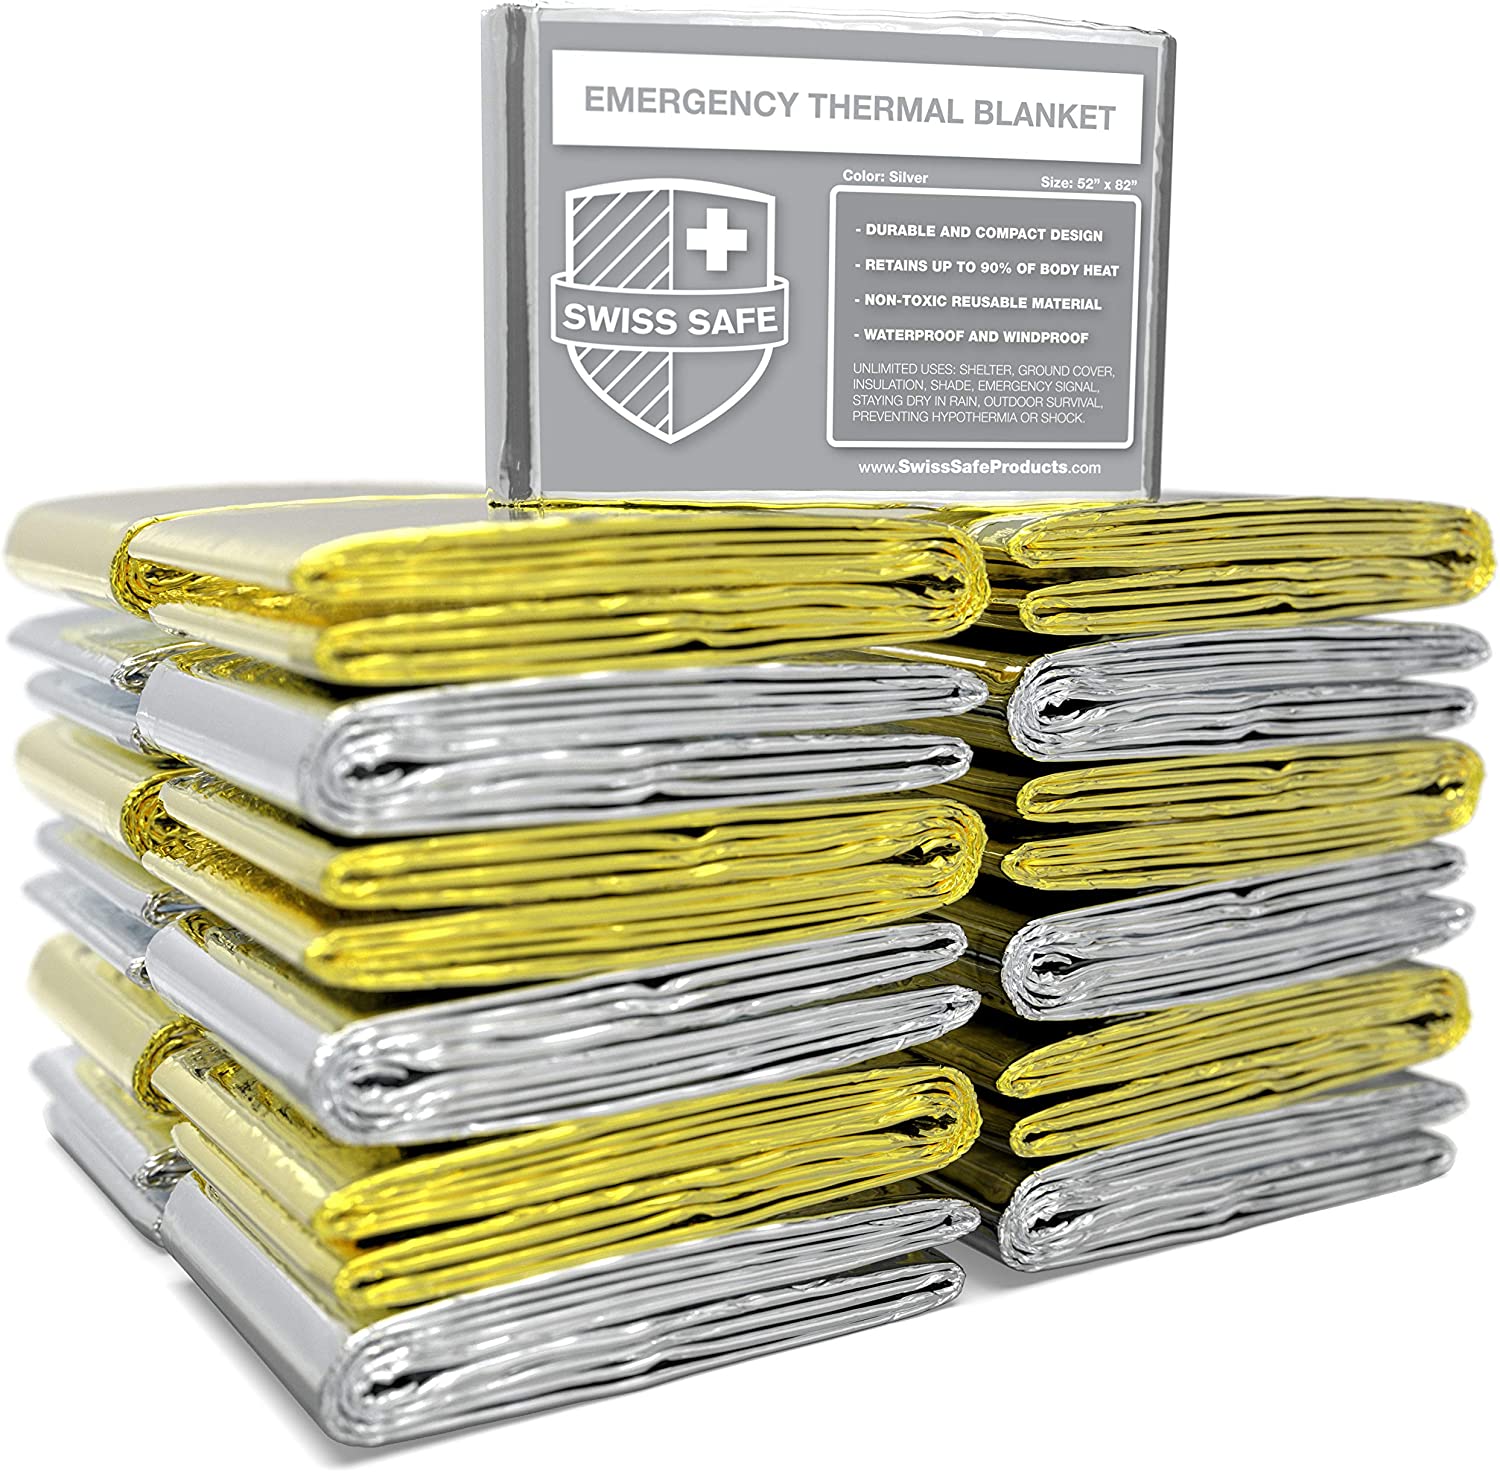 Swiss Safe Emergency Mylar Thermal Blankets (Bulk 30-Pack) – Designed for NASA, Outdoors, Hiking, Survival, Marathons or First Aid (Silver/Gold)